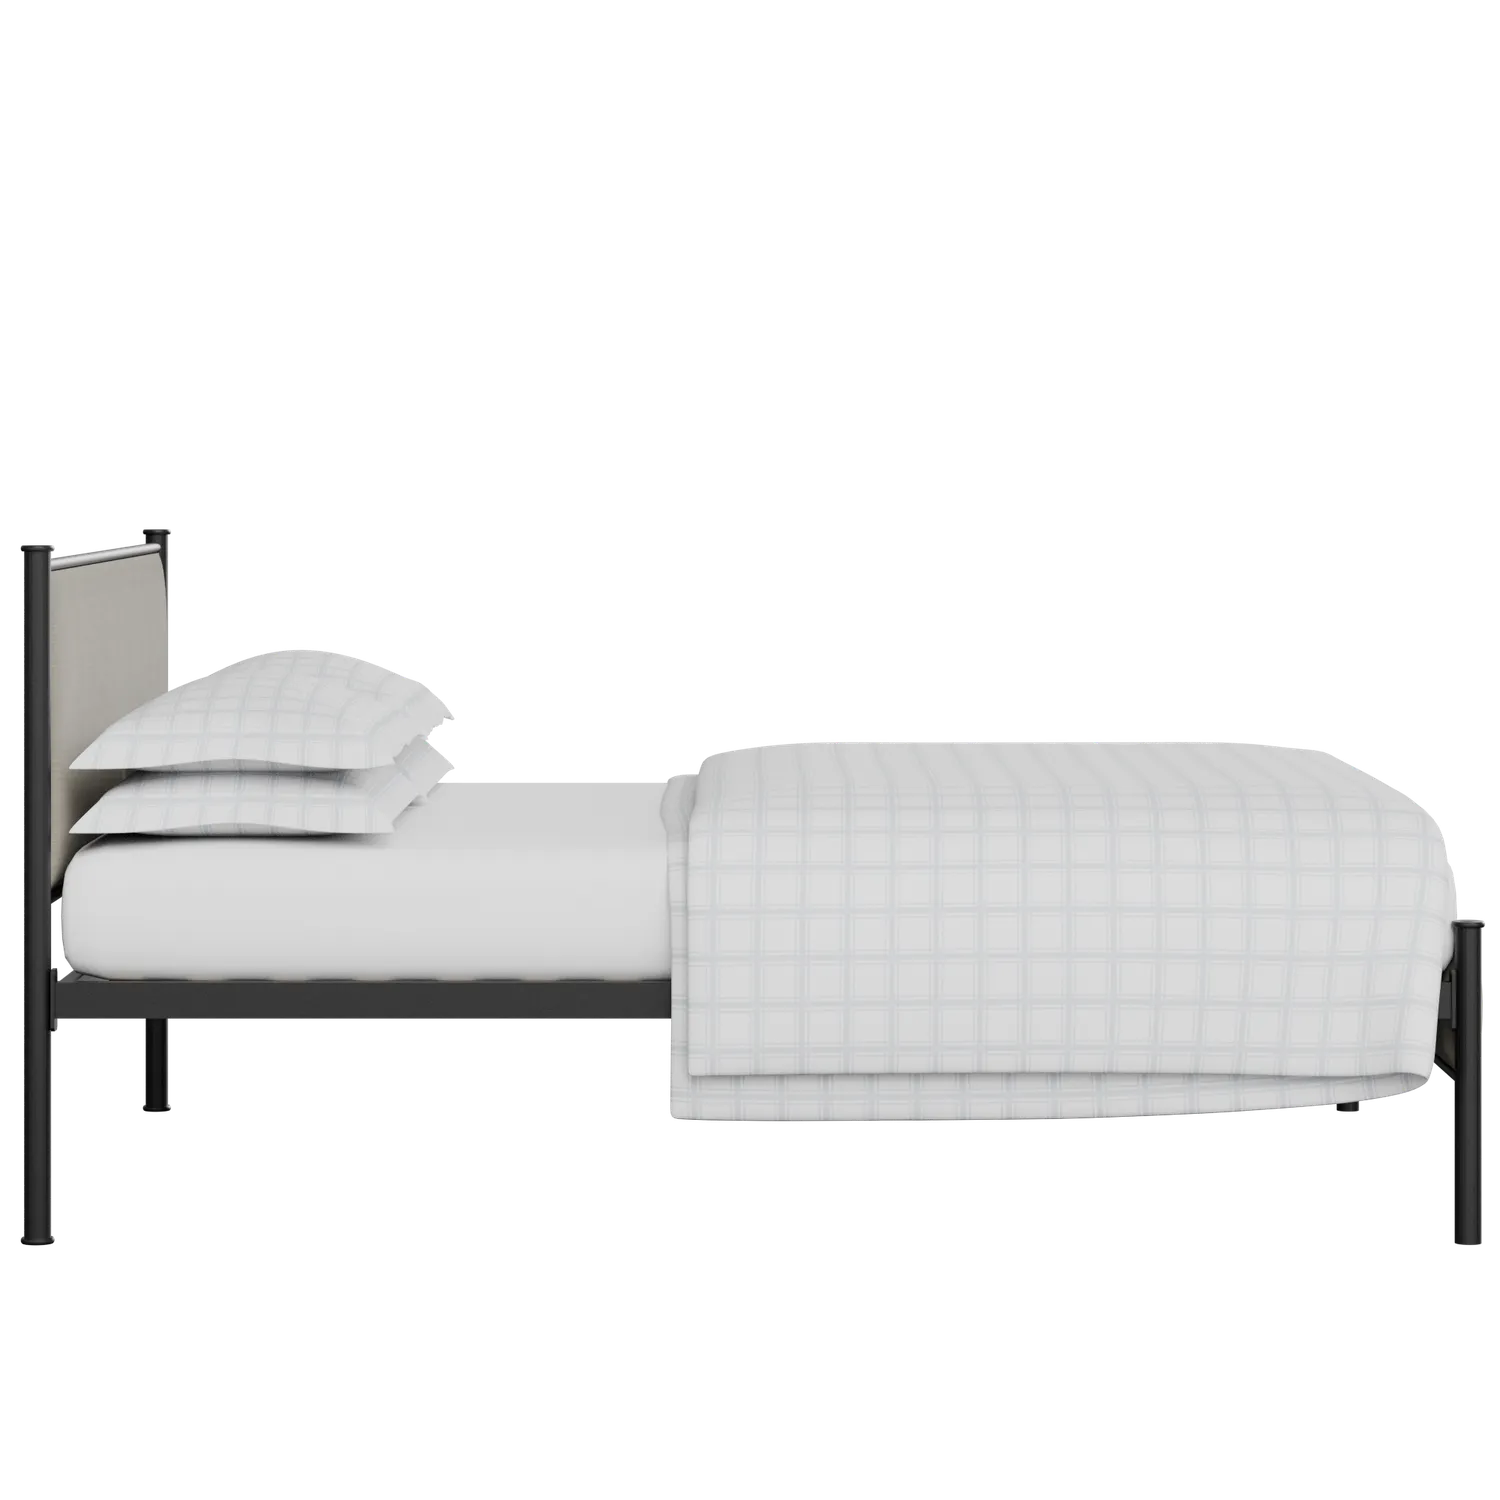 Brest iron/metal upholstered bed in black with grey fabric